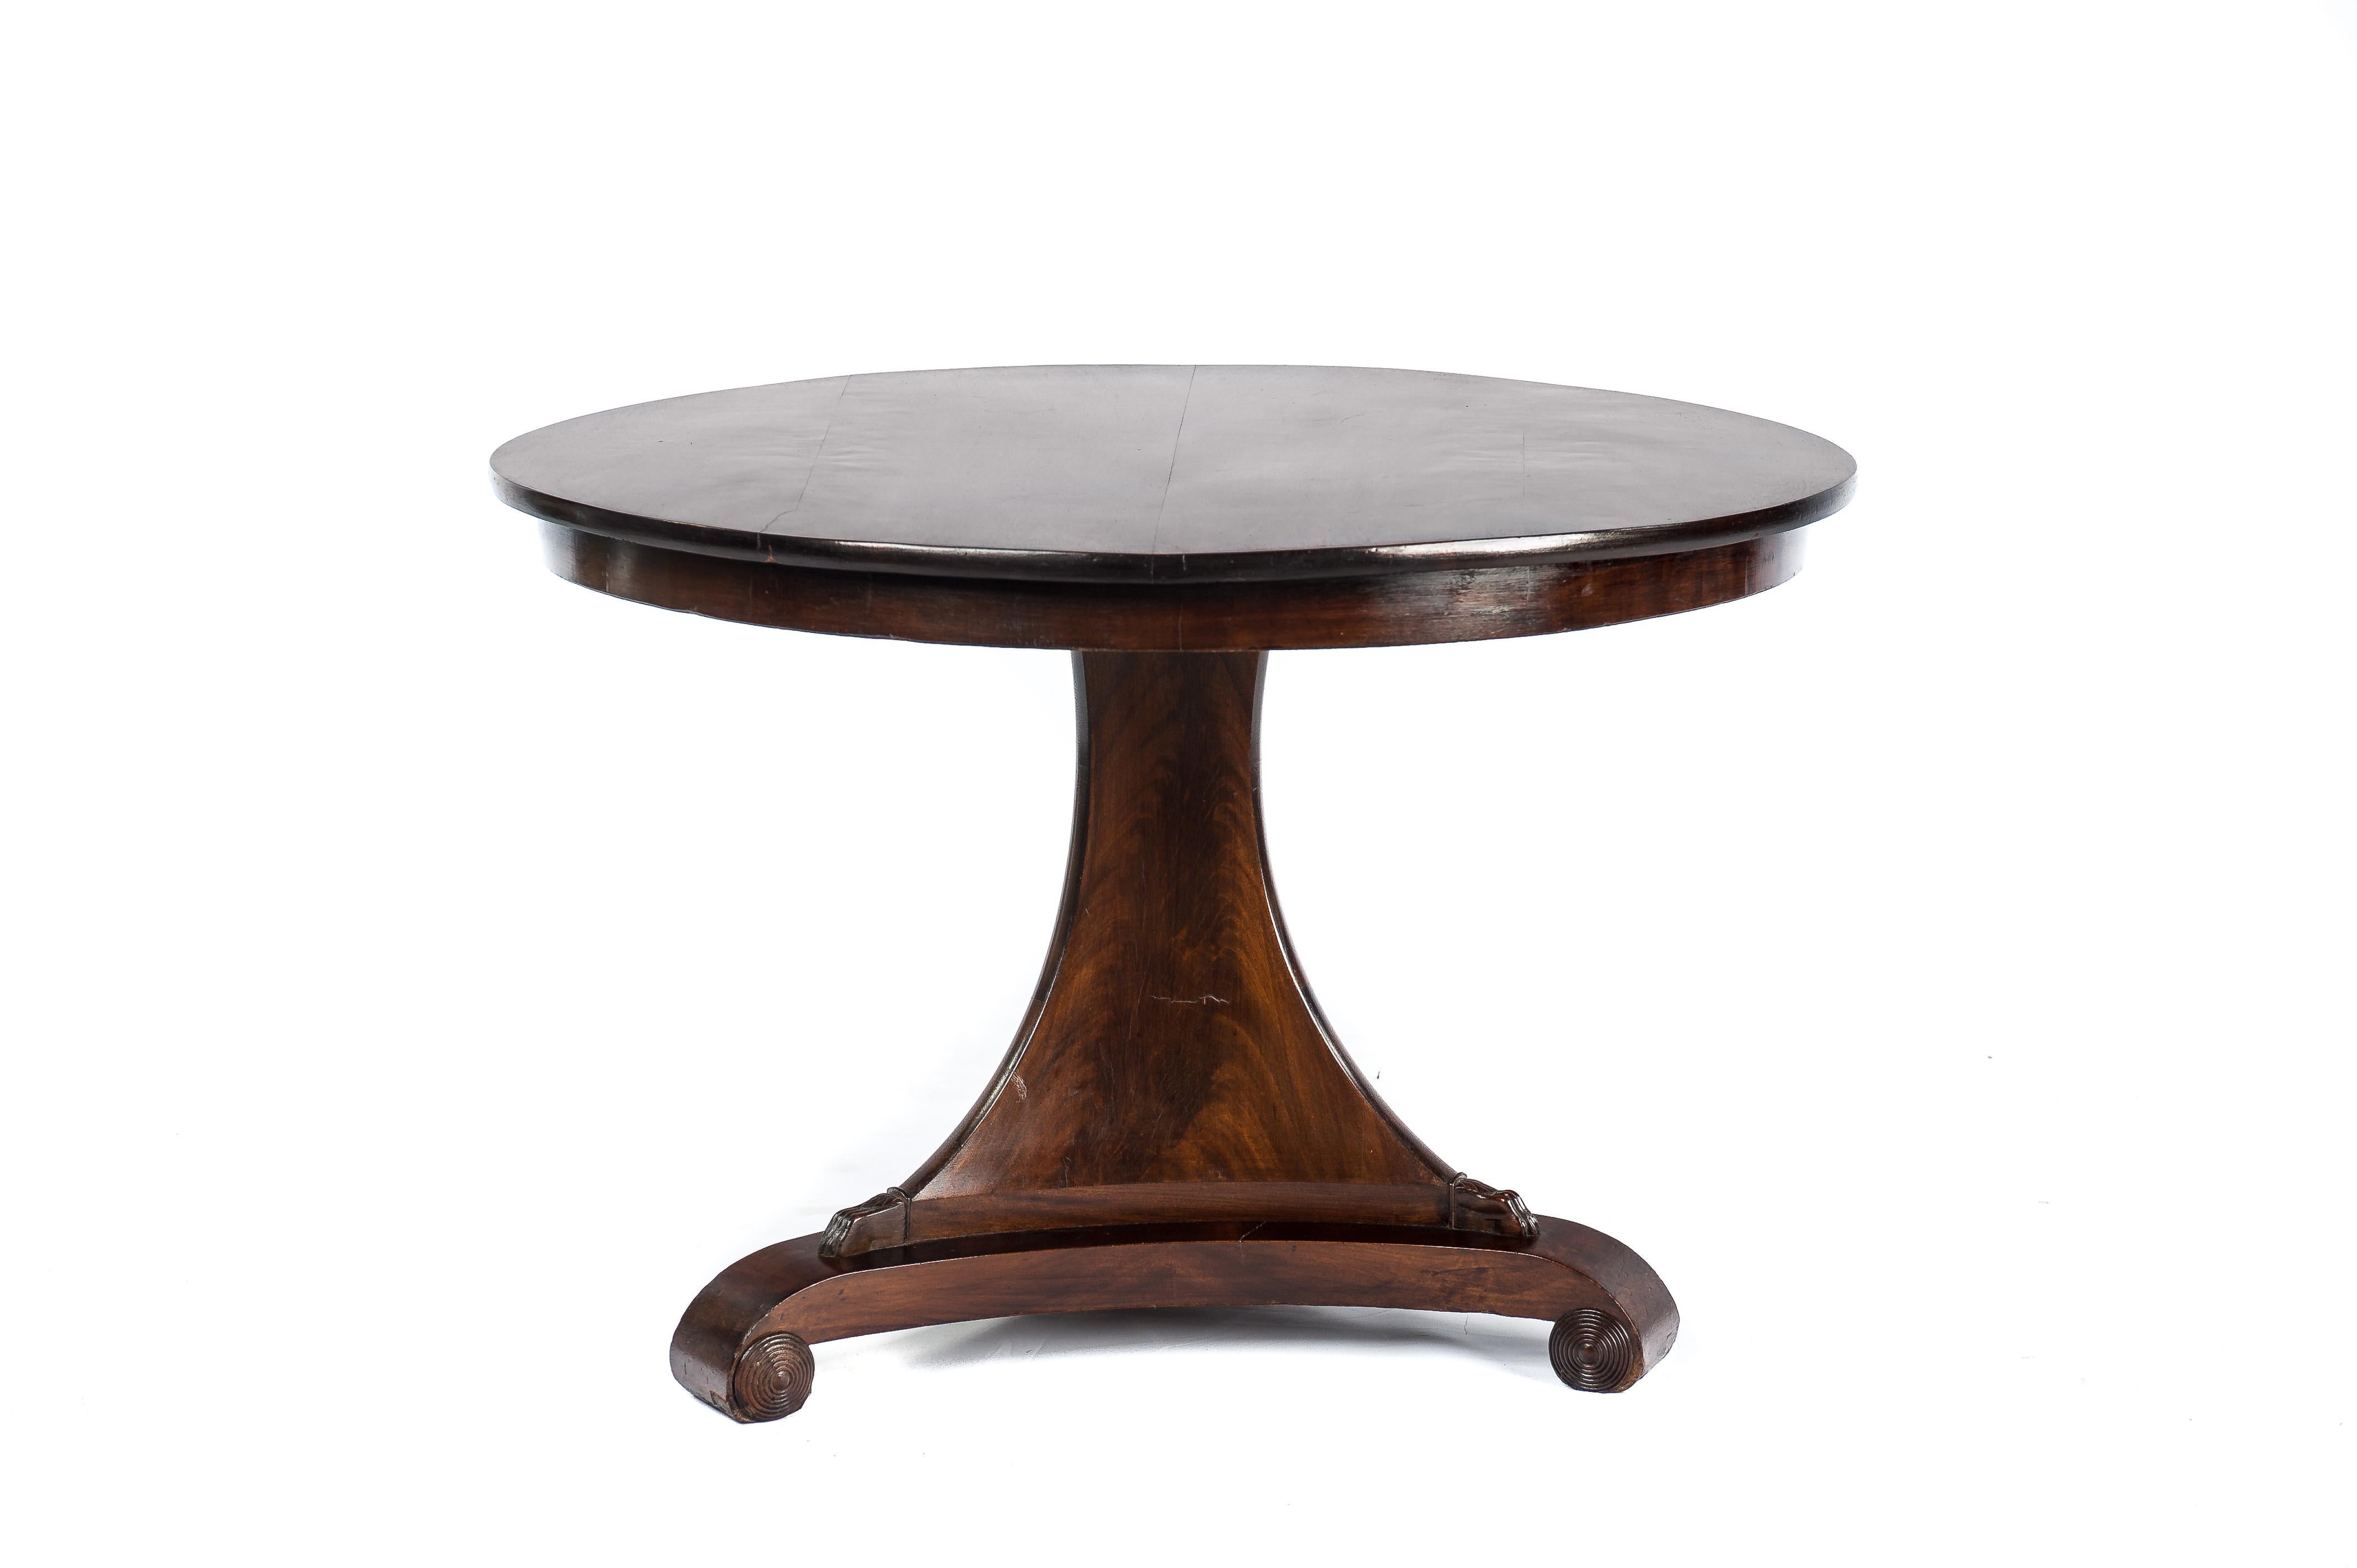 A beautiful round mahogany dining table on a trefoil platform base that ends in elegant scrolls. The base has an elegant triangular column that ends in claw feet to support the tabletop. The tabletop is made in 0.8-inch thick solid mahogany in a